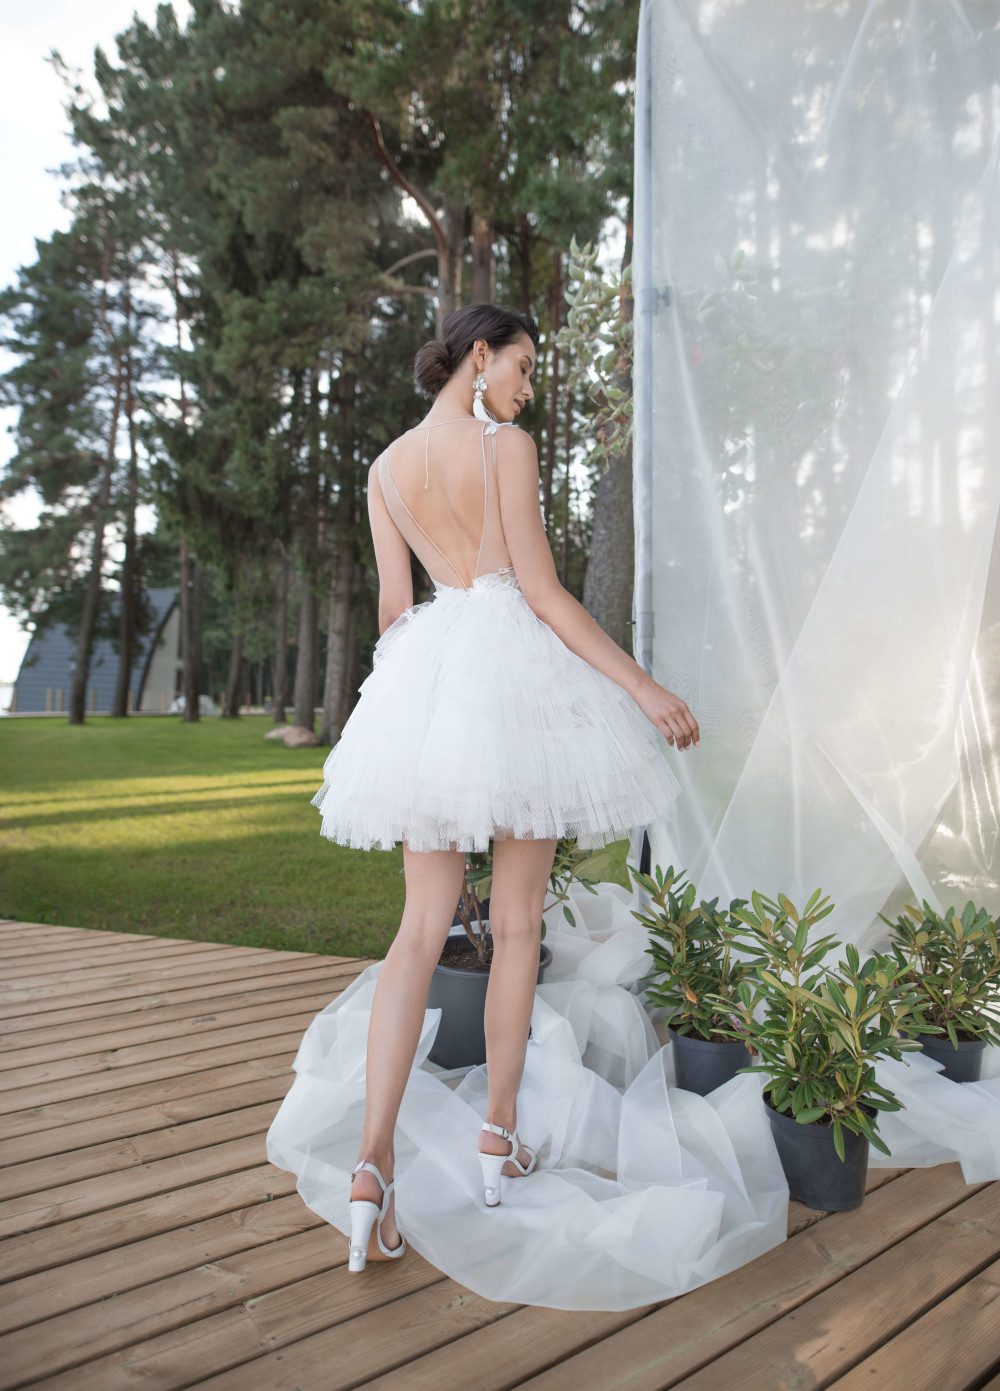 A bride wearing wedding dress with short skirt with horizontal flounces and lace bodice decorated with volume flowers by Rara Avis at Dell'Amore Bridal, Auckland, NZ. 3